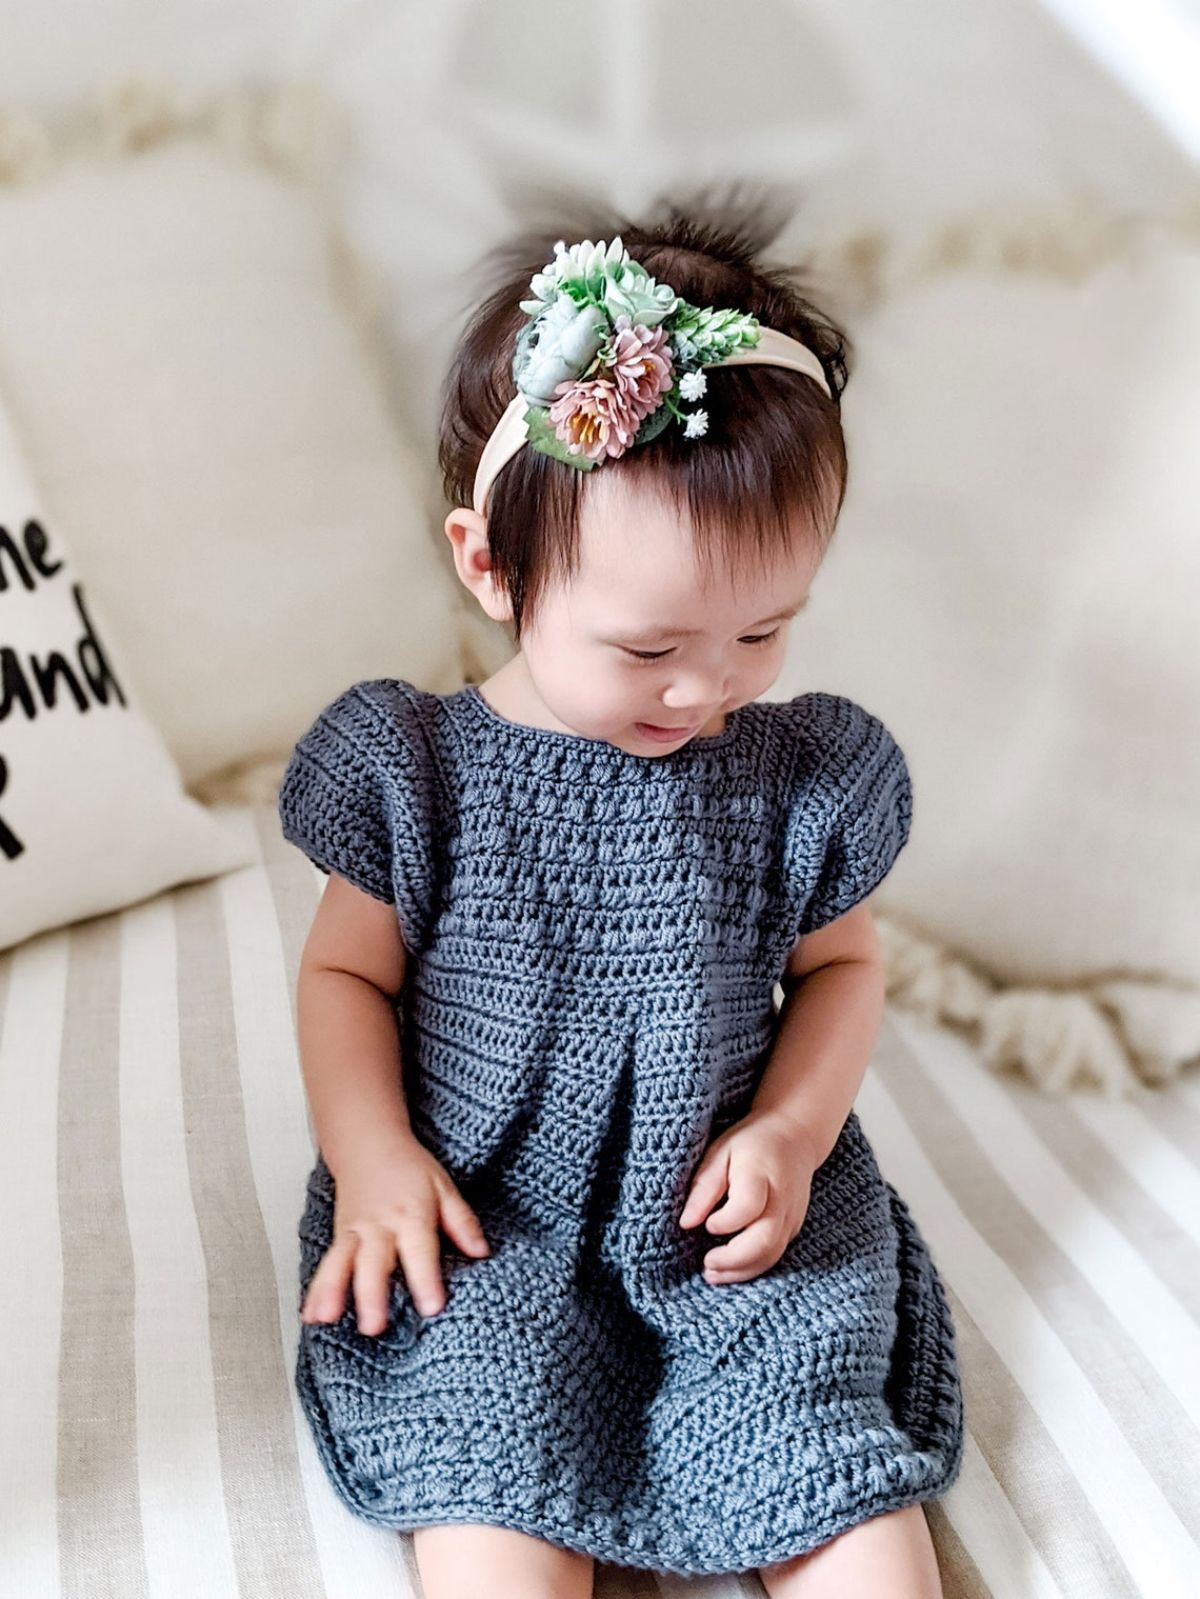 Dark haired toddler wearing a navy capped sleeve crochet dress with a high neck and a floral headband.